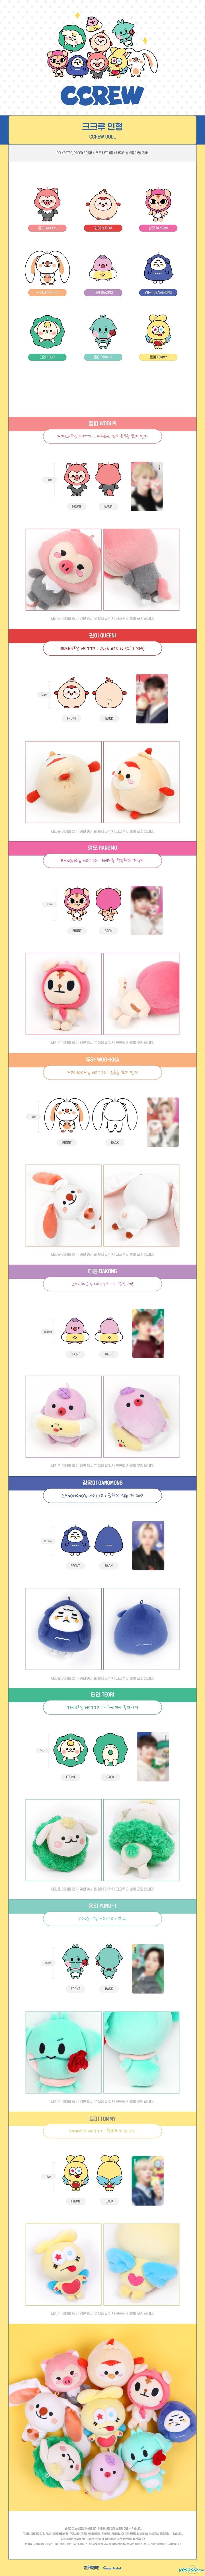 YESASIA: Cravity 'CCREW' Official Goods - Doll (RANGMO) MALE STARS 